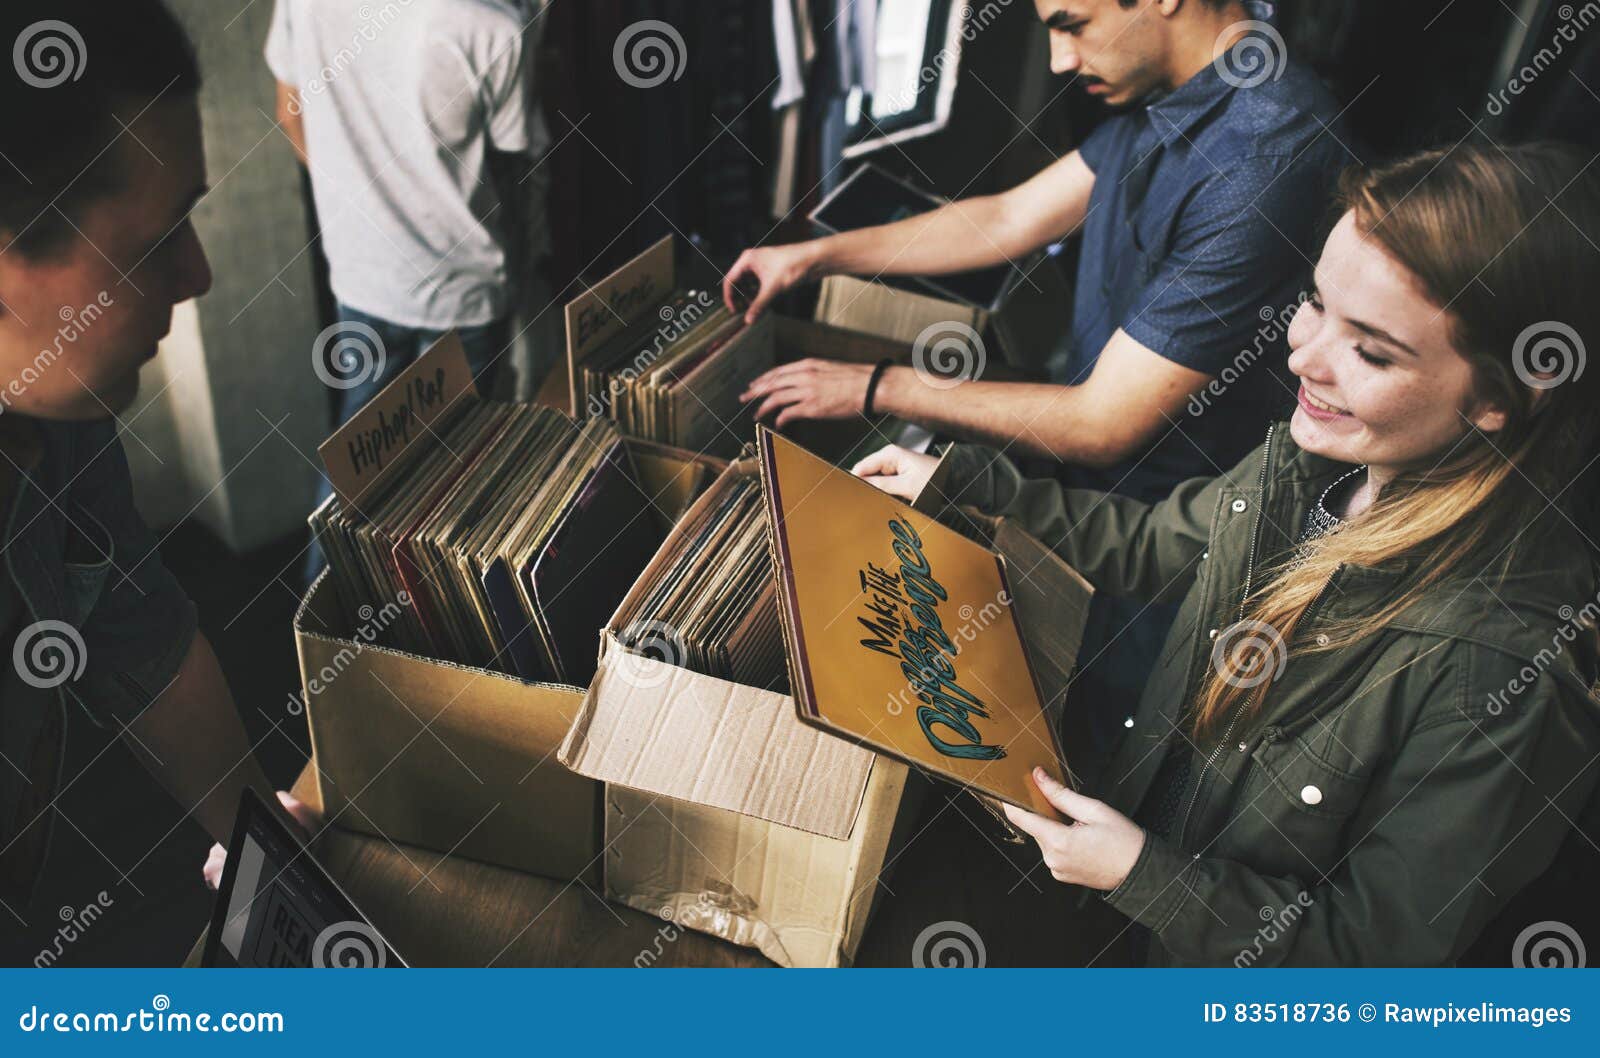 vinyl record store music shopping oldschool classic concept